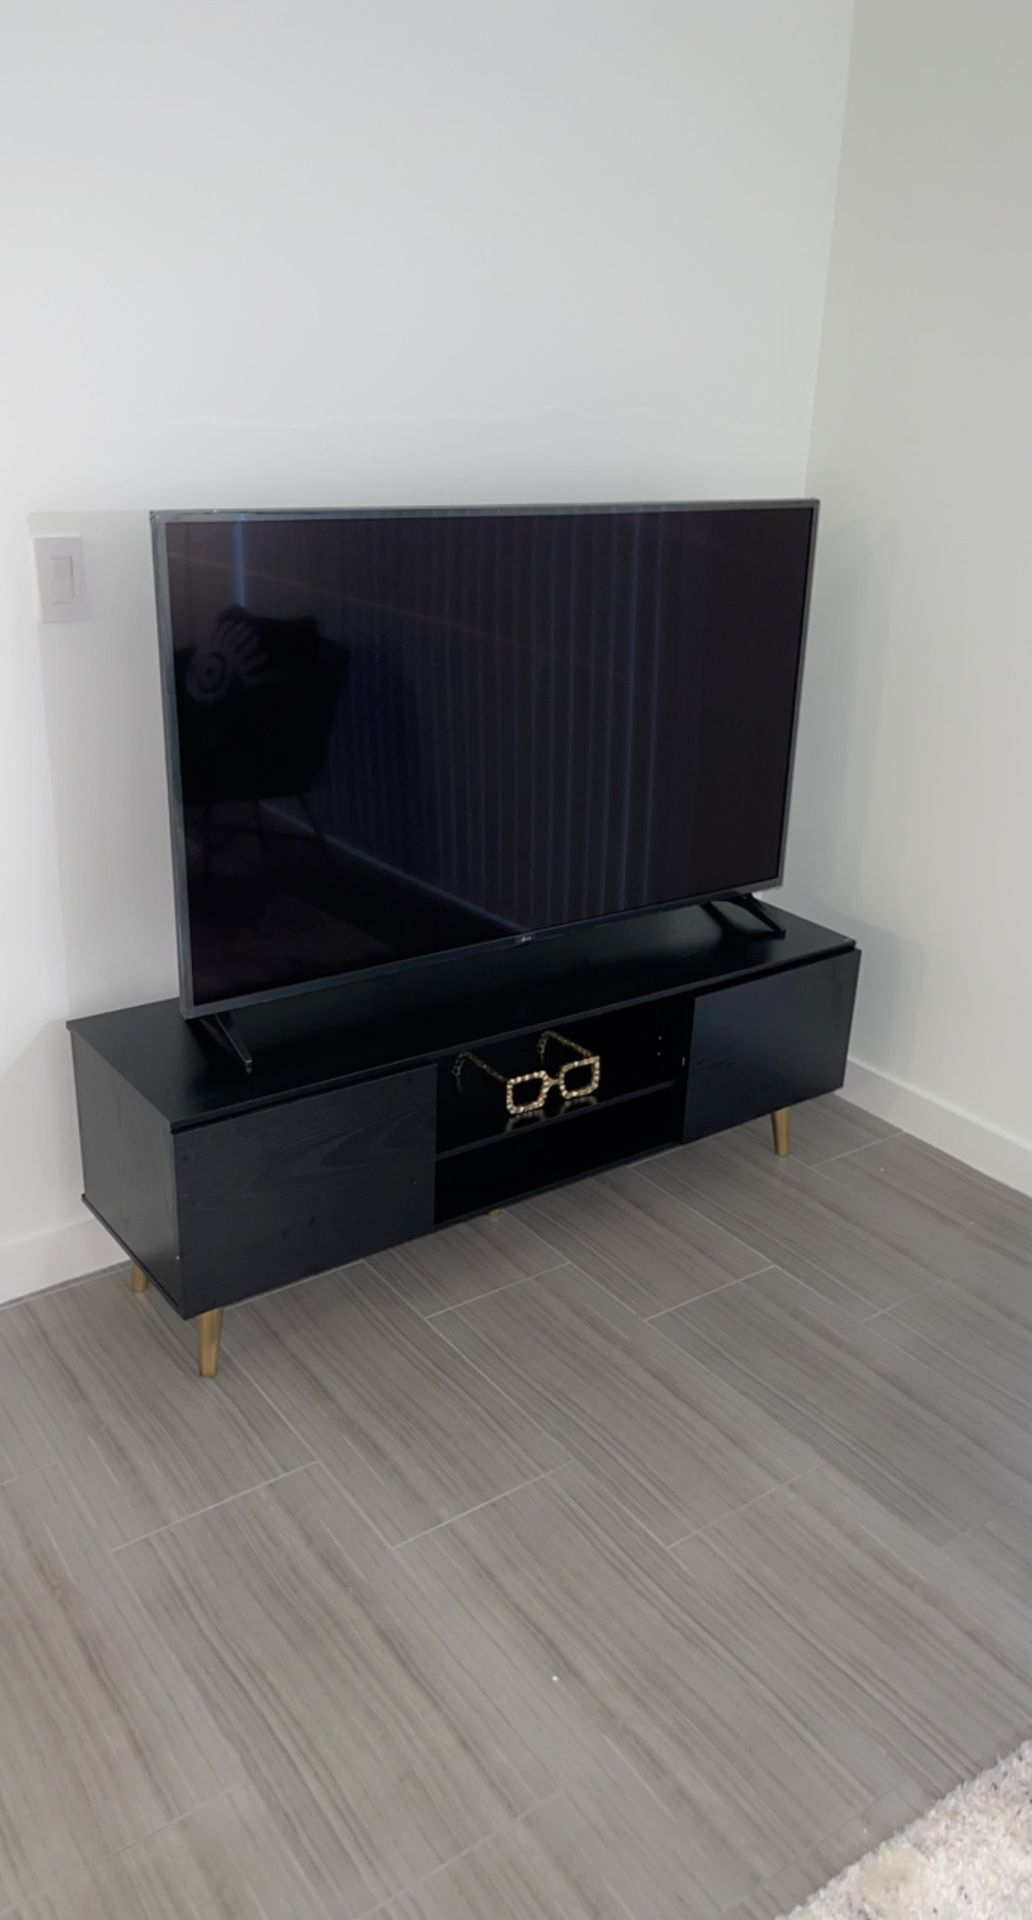 Console/ TV Stand